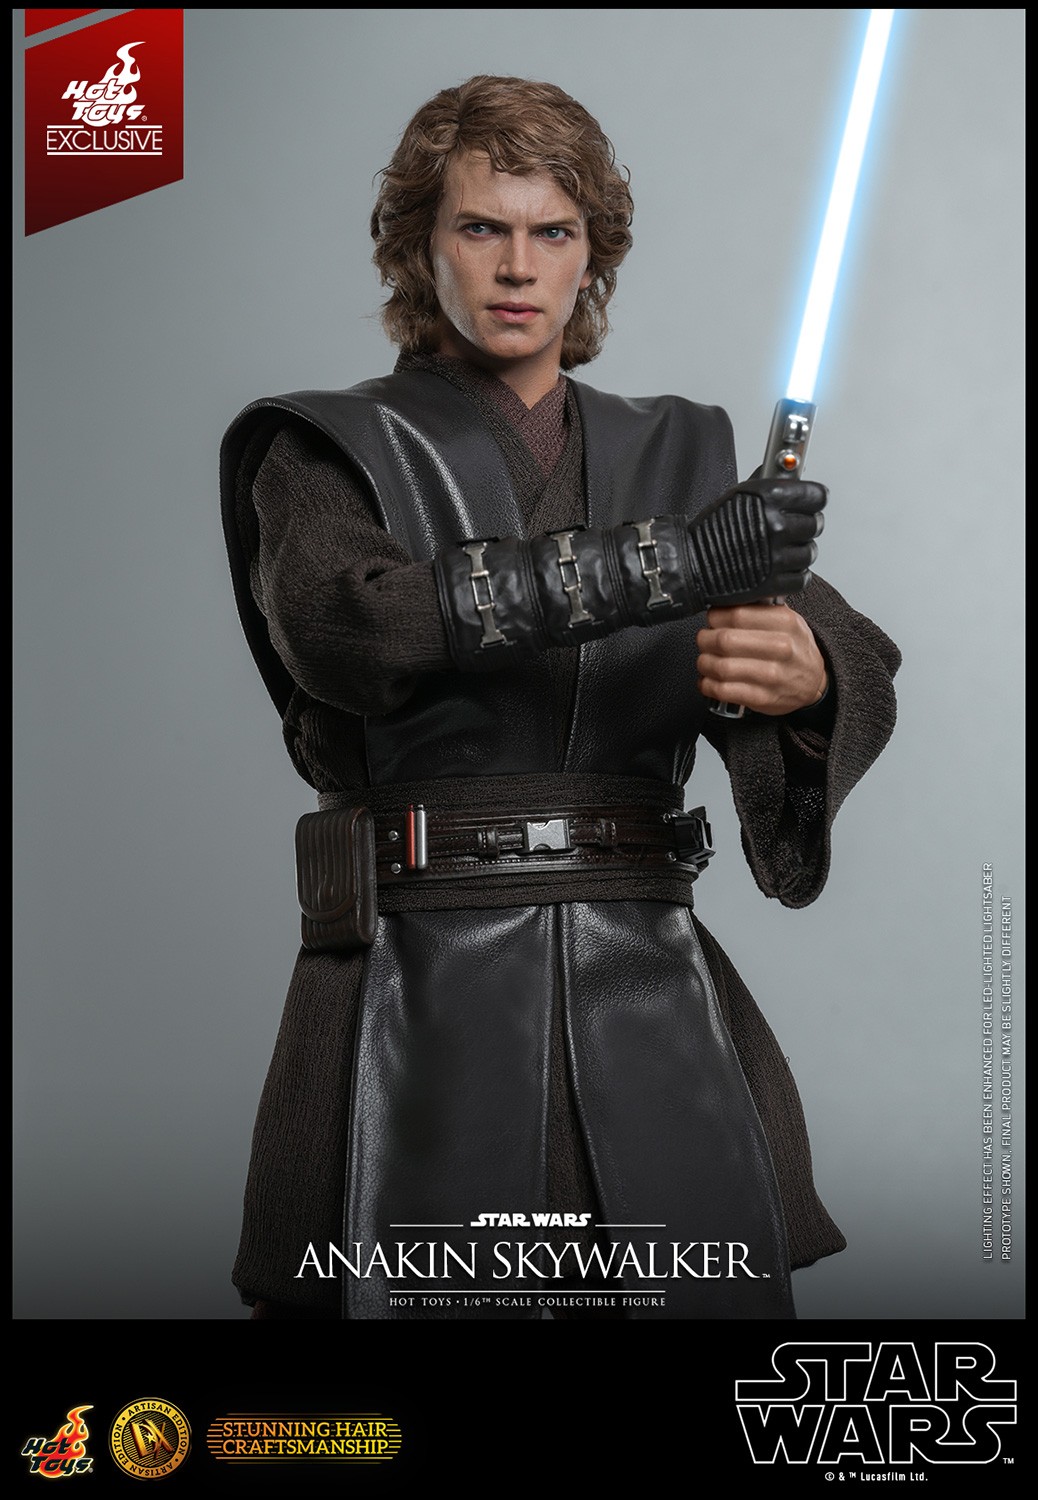 Anakin Skywalker and STAP Sixth Scale Collectible Figure Set by Hot Toys